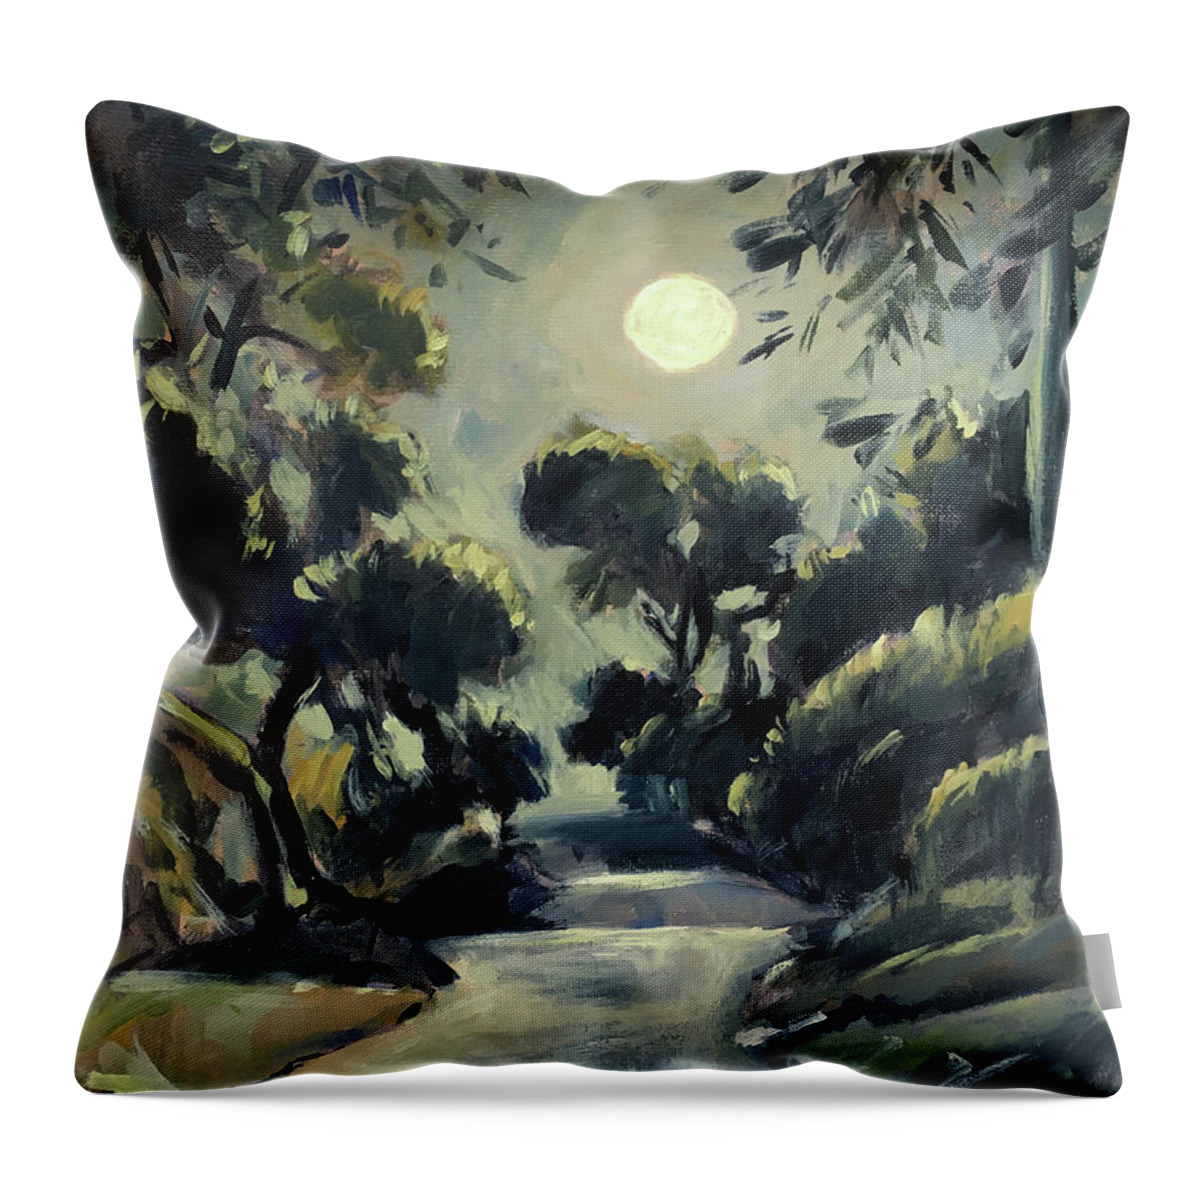 Loggos Throw Pillow featuring the painting Morning moon Loggos by Nop Briex